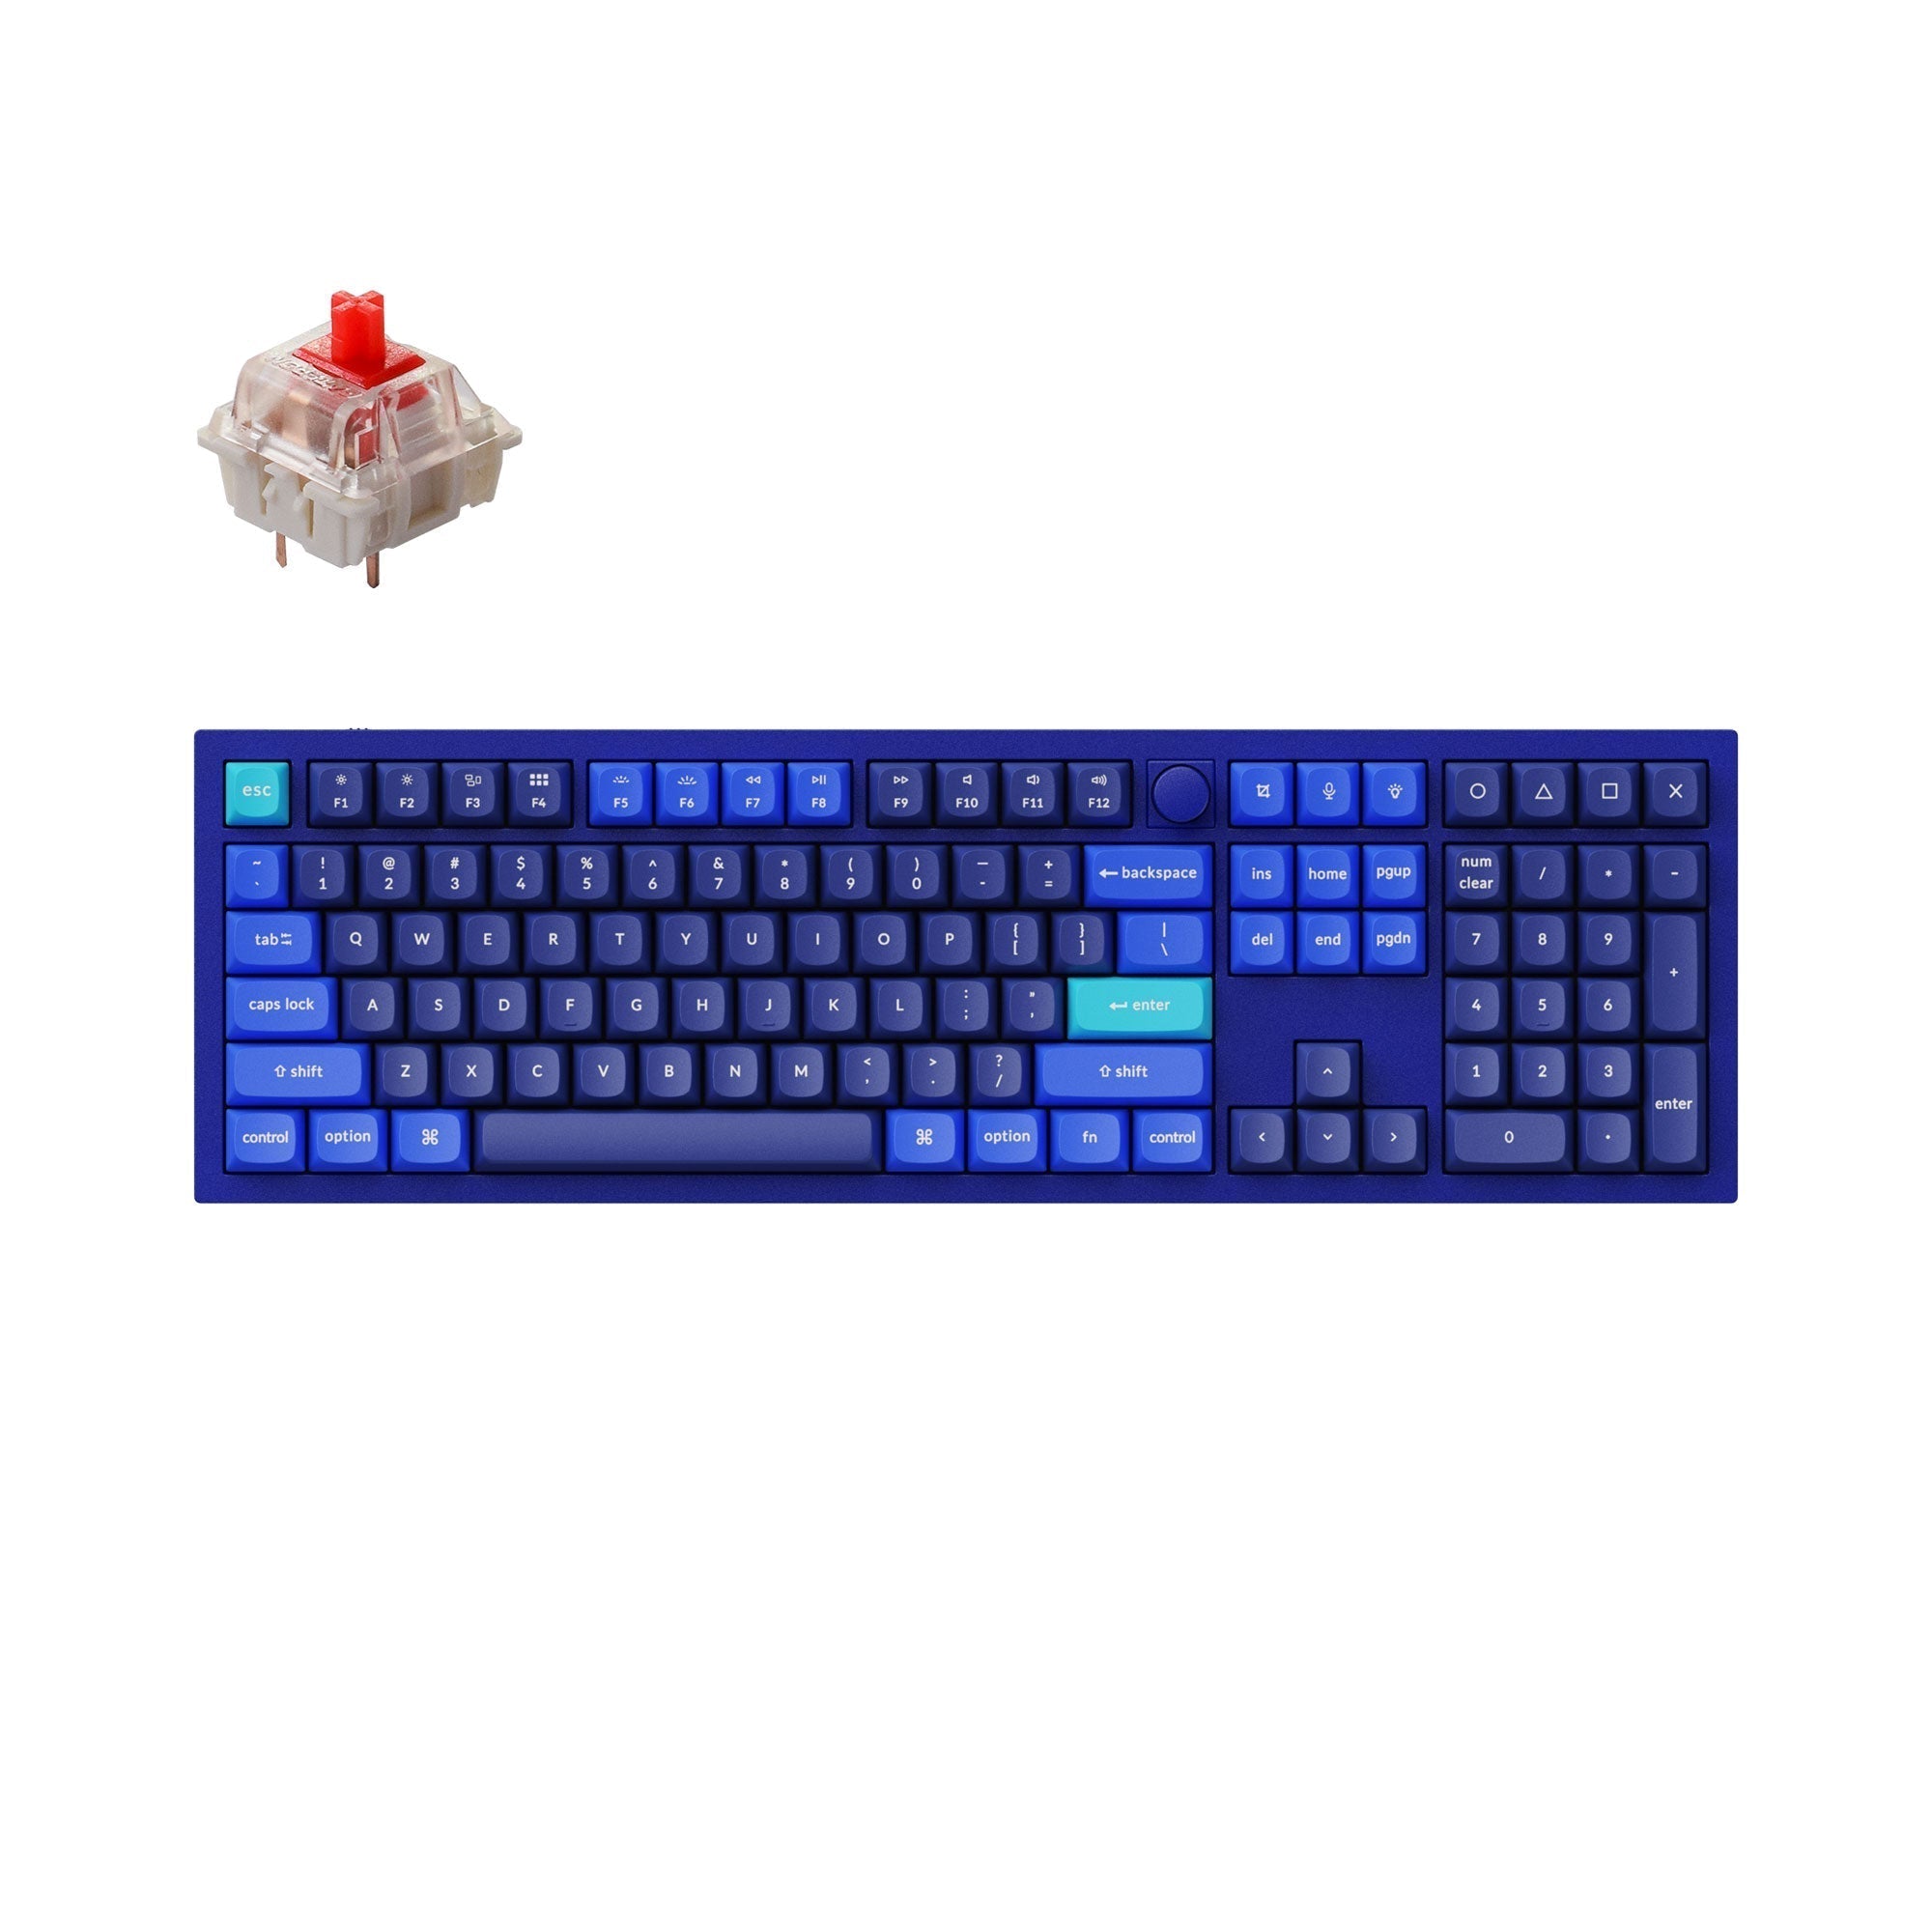 Keychron Q6 QMK/VIA custom mechanical keyboard knob version full size aluminum for Mac Windows Linux fully assembled blue frame with Gateron G Pro switch red